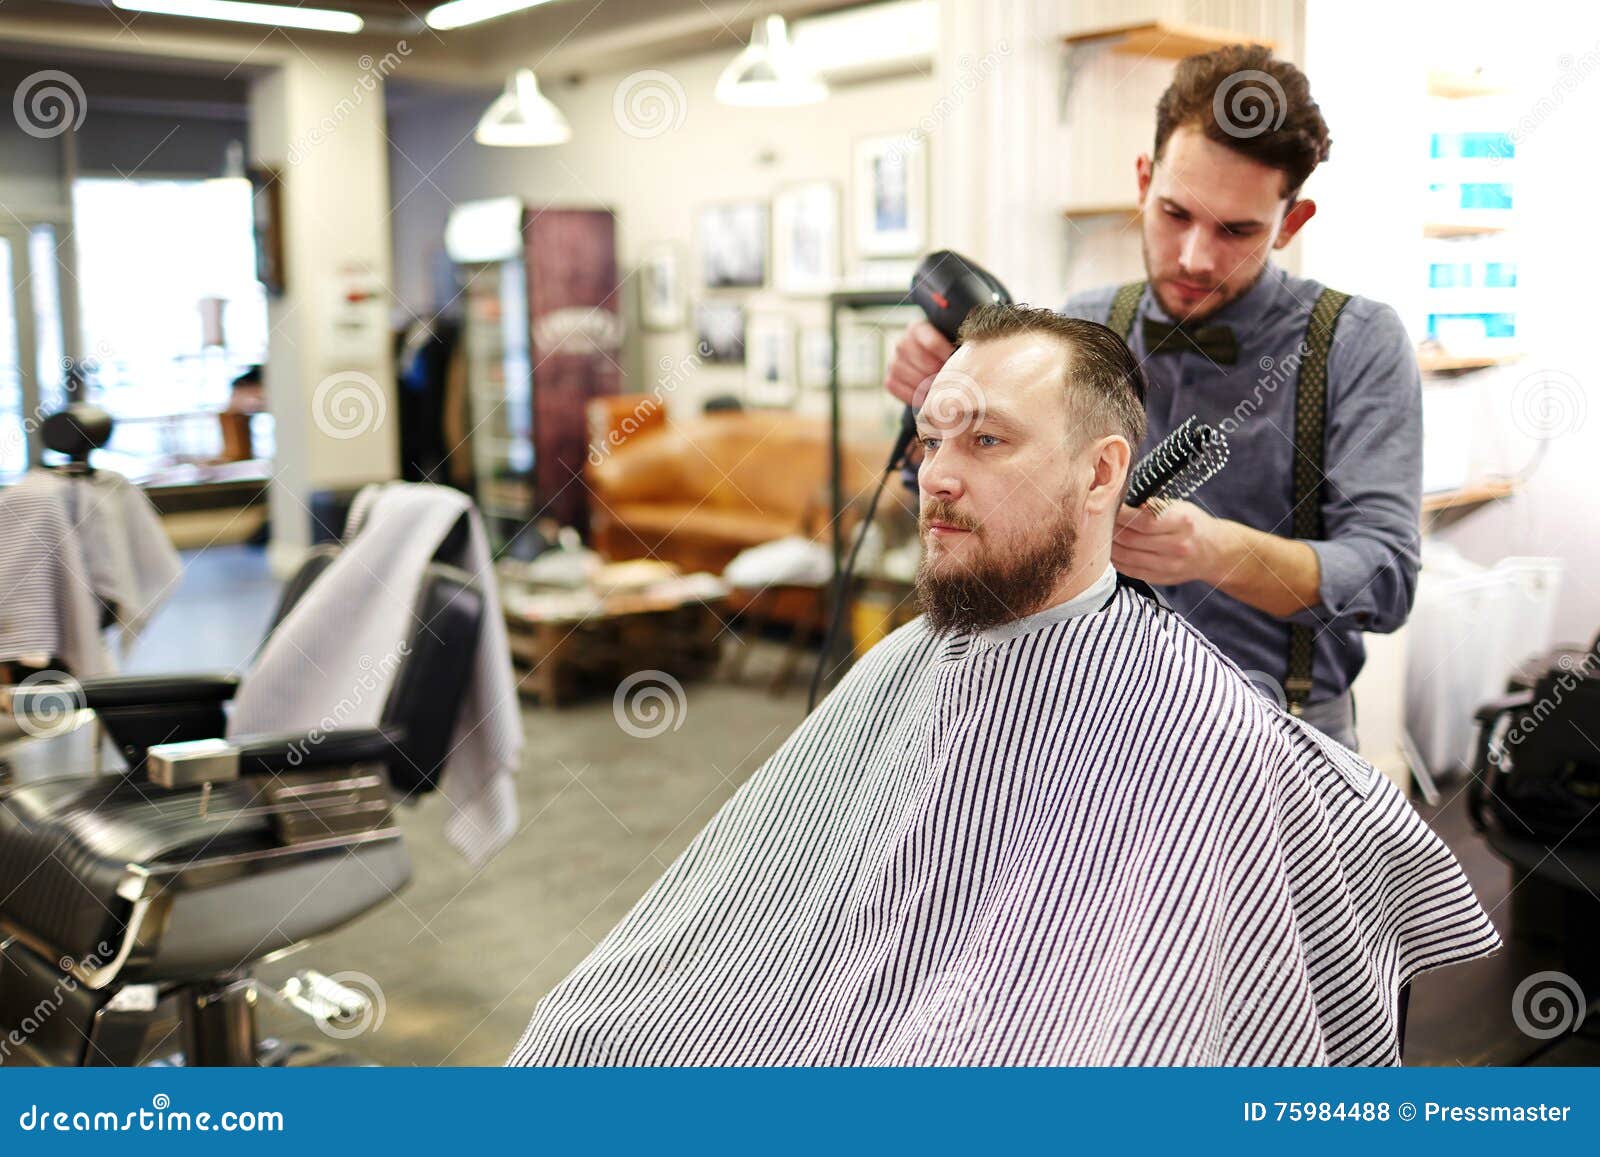 Visiting barber shop stock photo. Image of comb, adult - 75984488